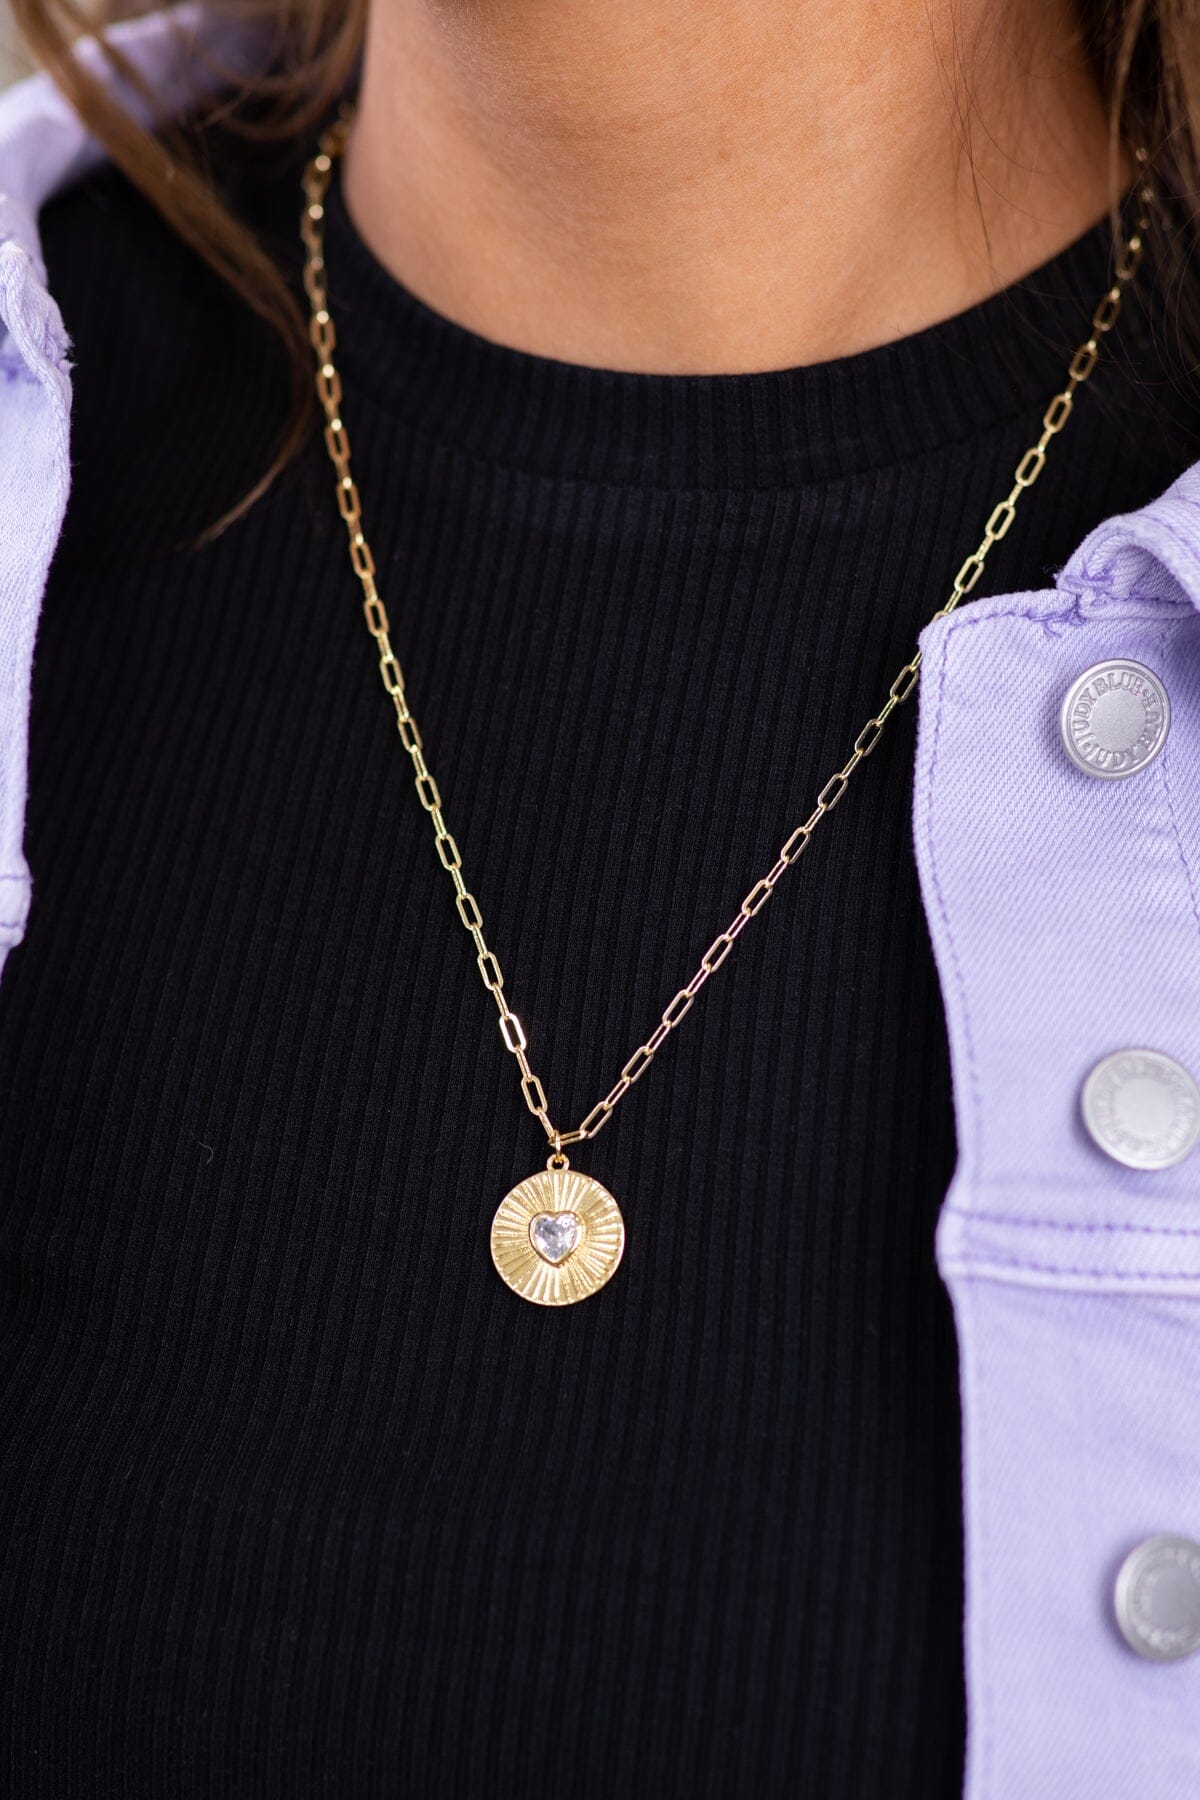 Gold Chain Necklace With Coin Pendant - Filly Flair